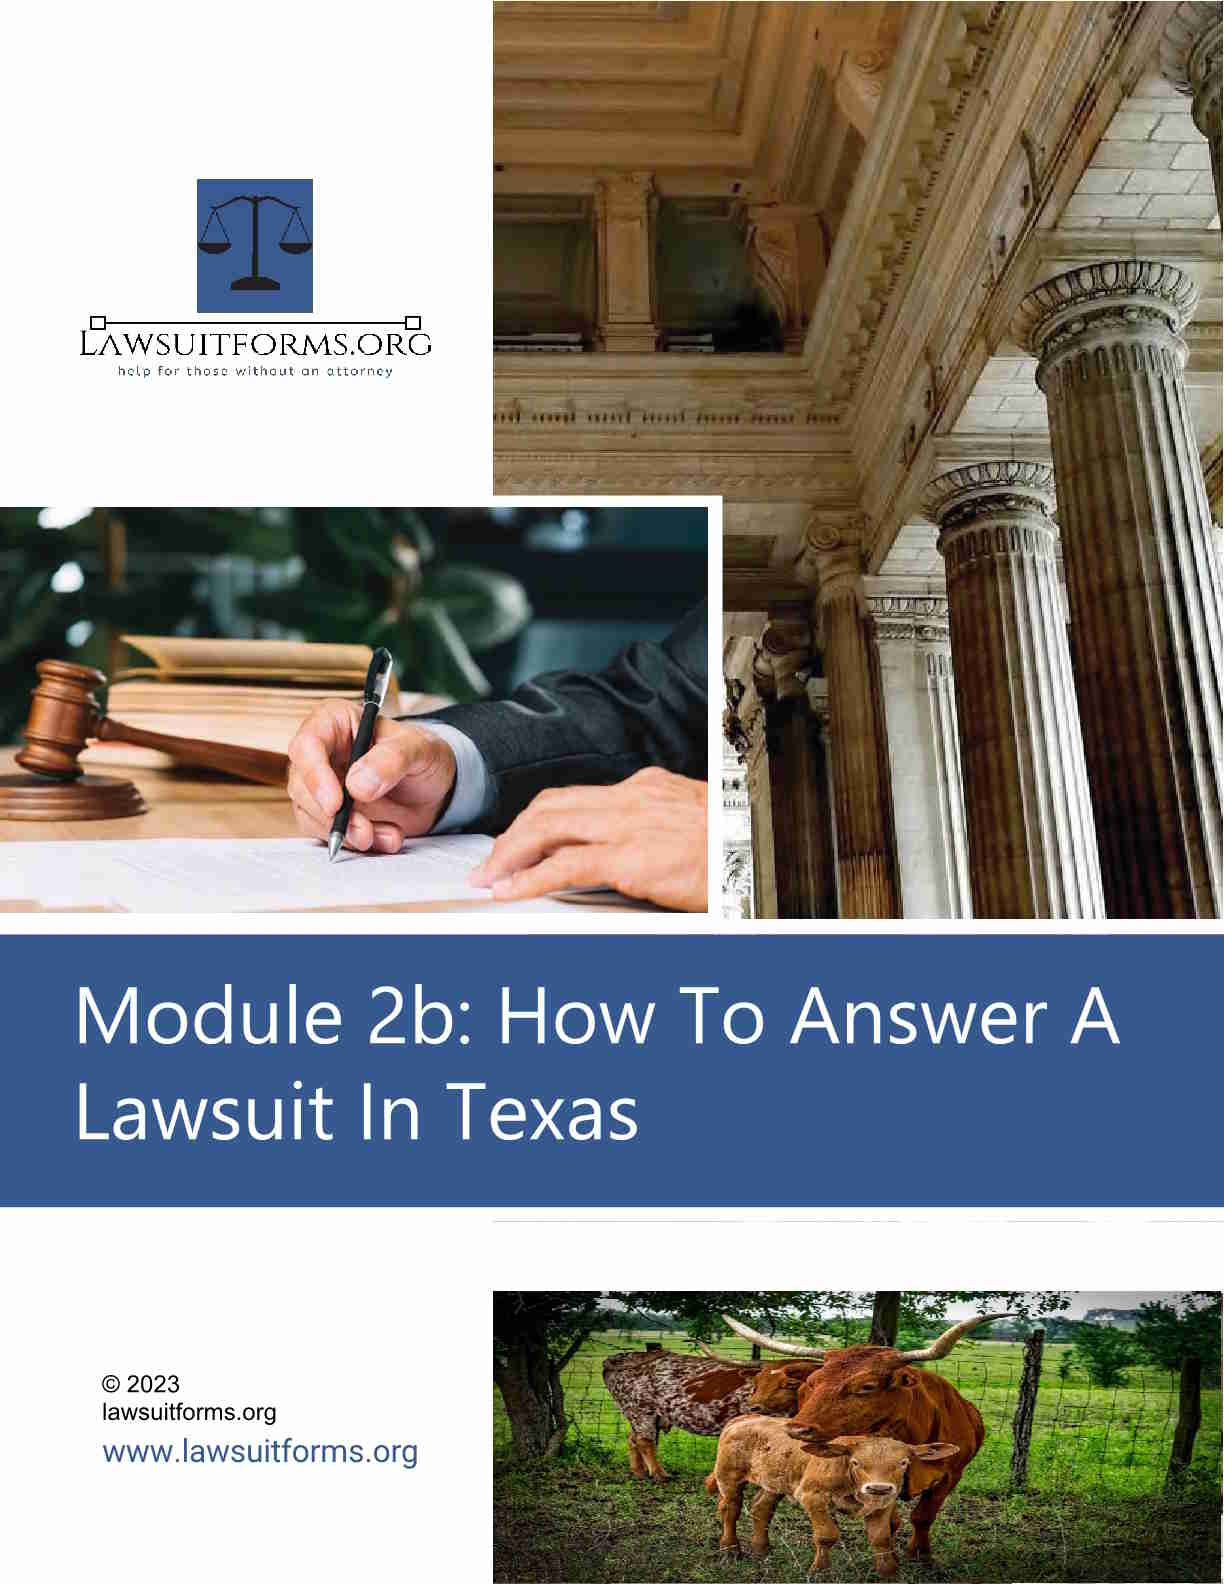 How to answer a lawsuit in Texas